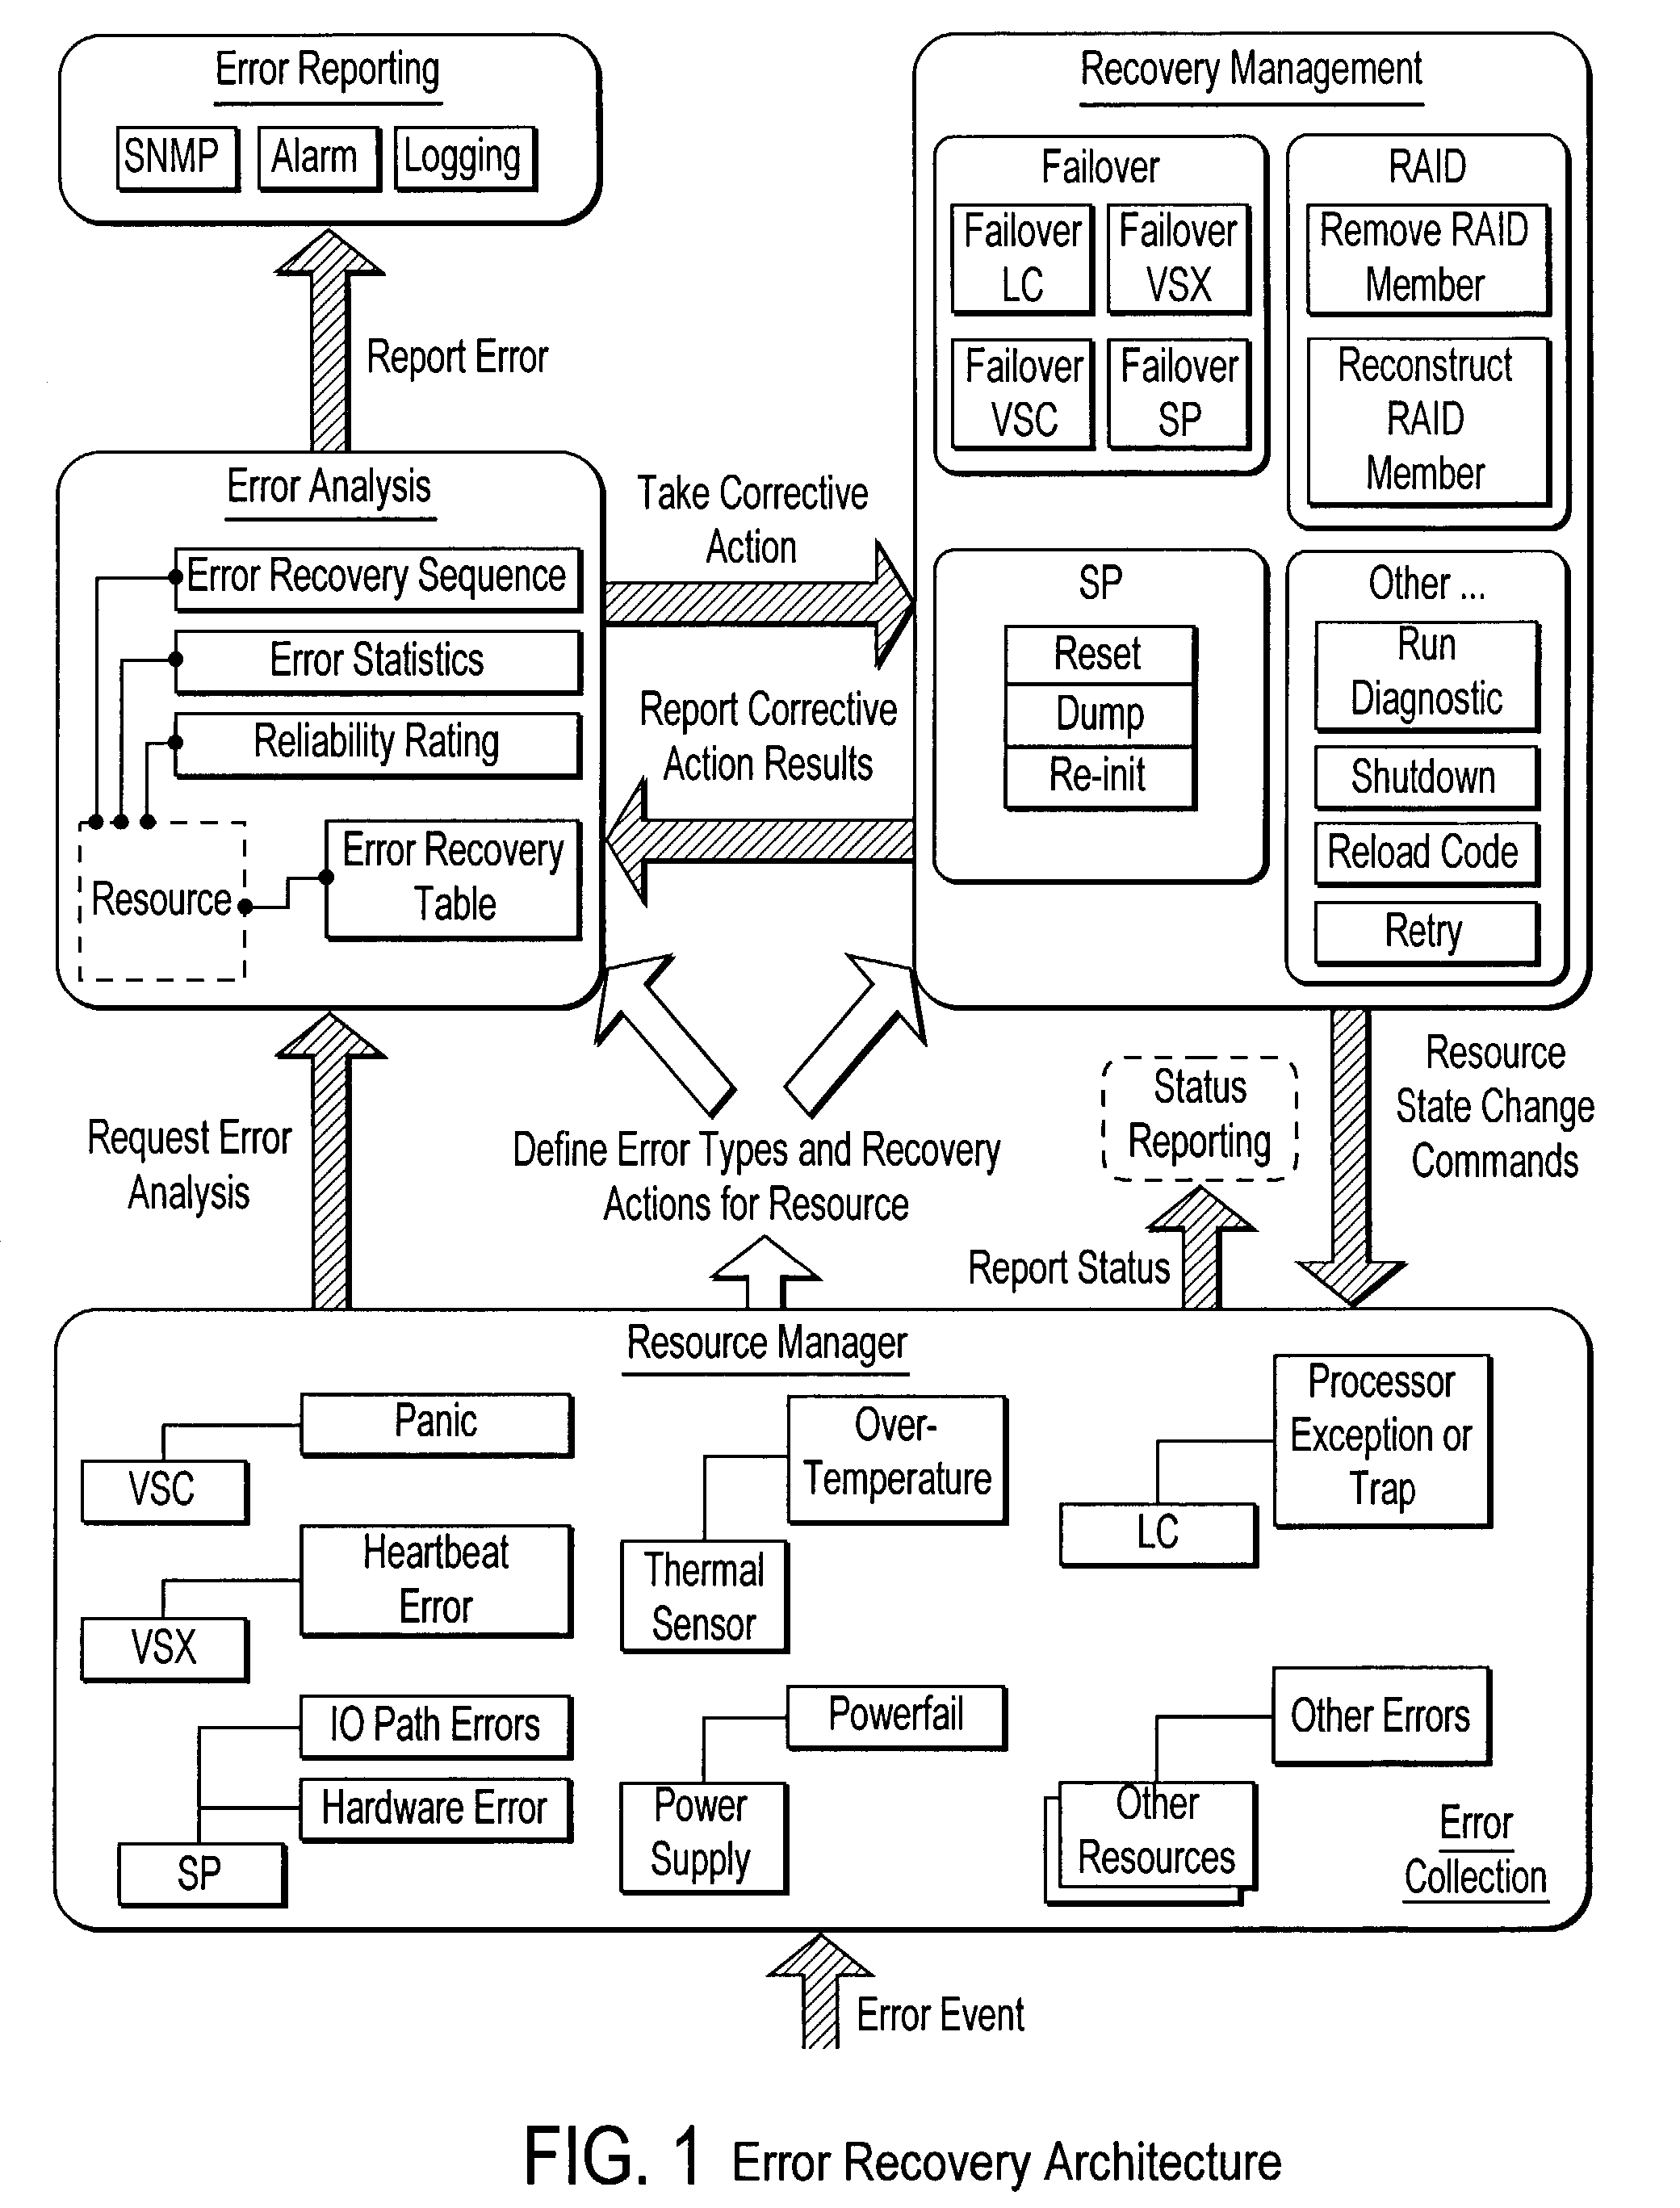 Failover processing in a storage system